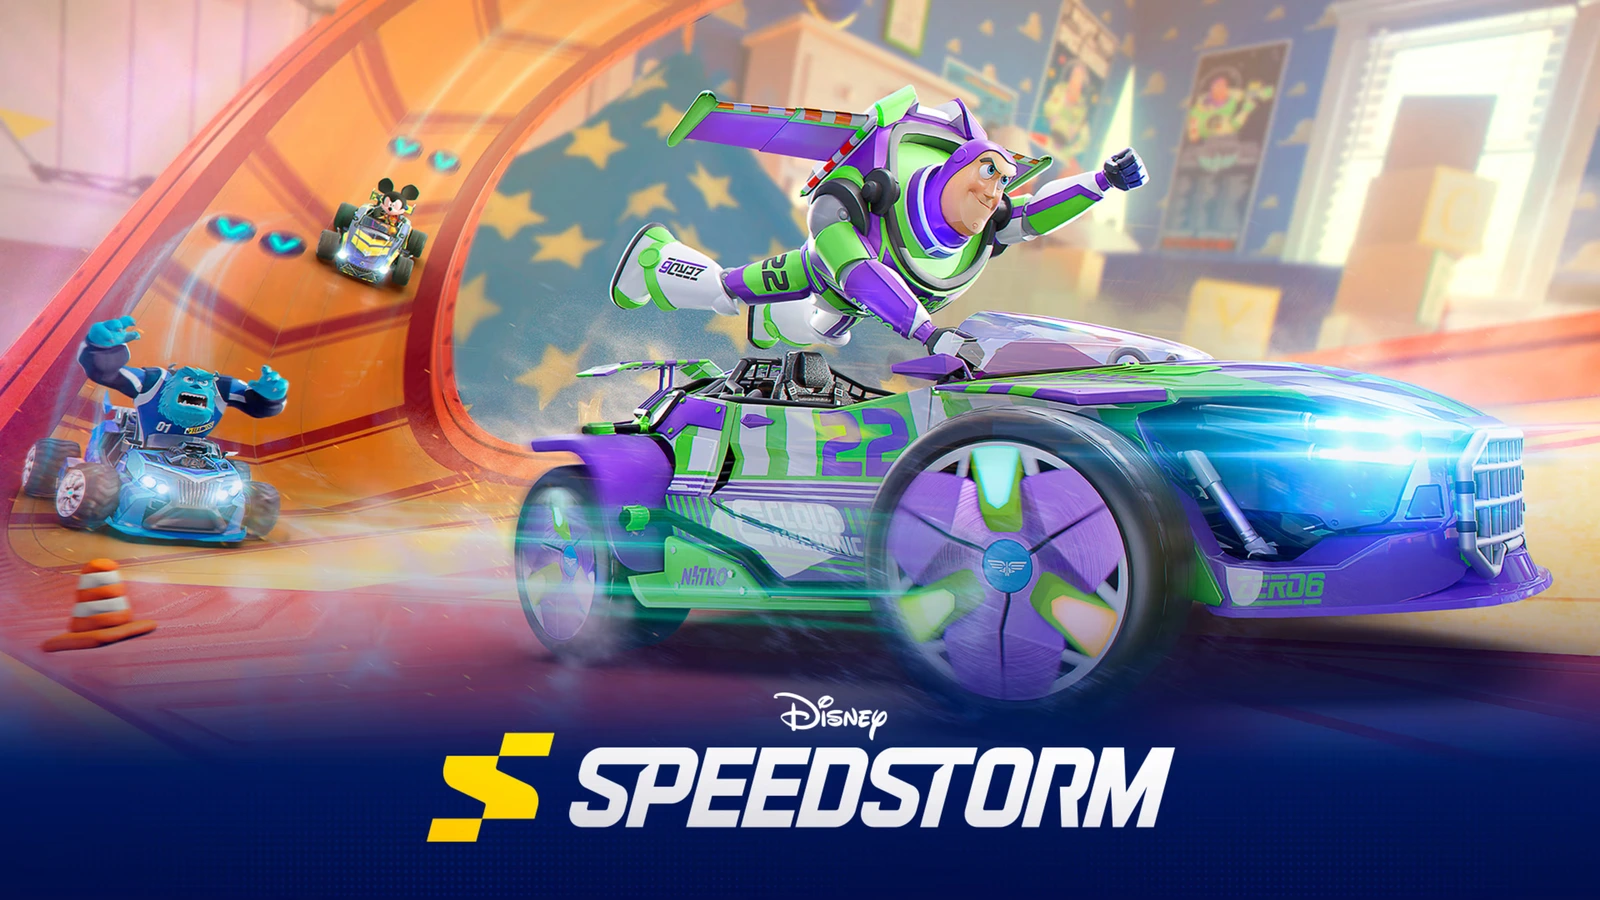 Fix in works for Disney SpeedStorm crashing issue on PS5